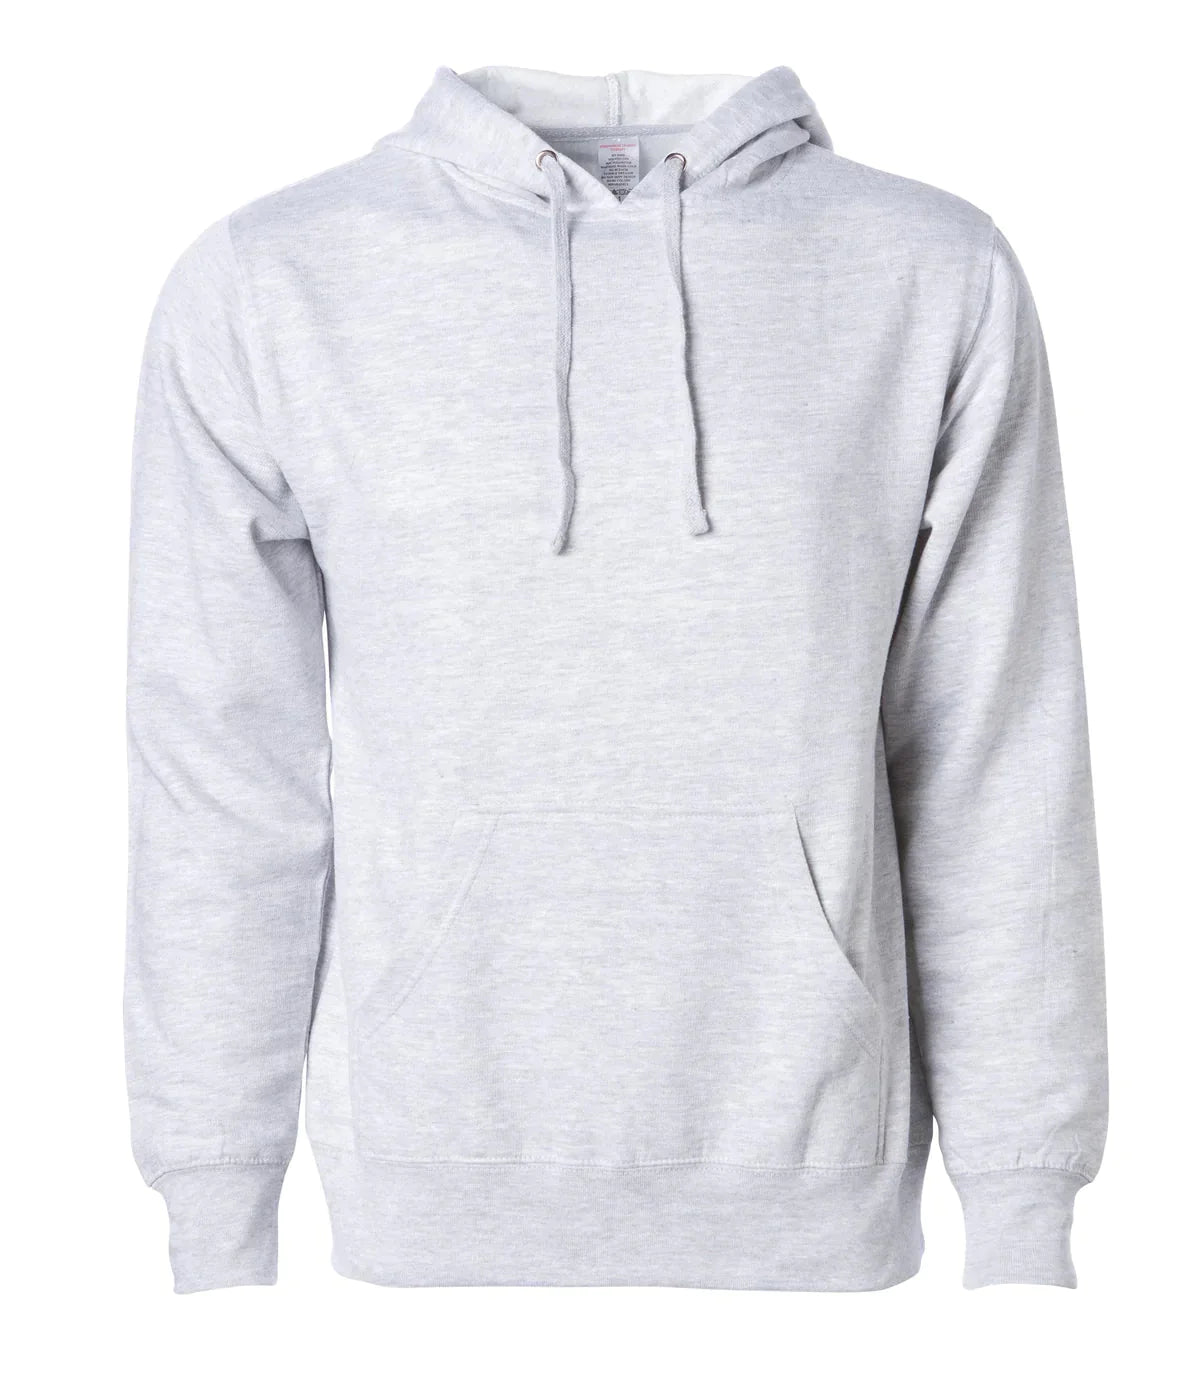 SS4500 Midweight Hooded Pullover Sweatshirt - Grey Heather